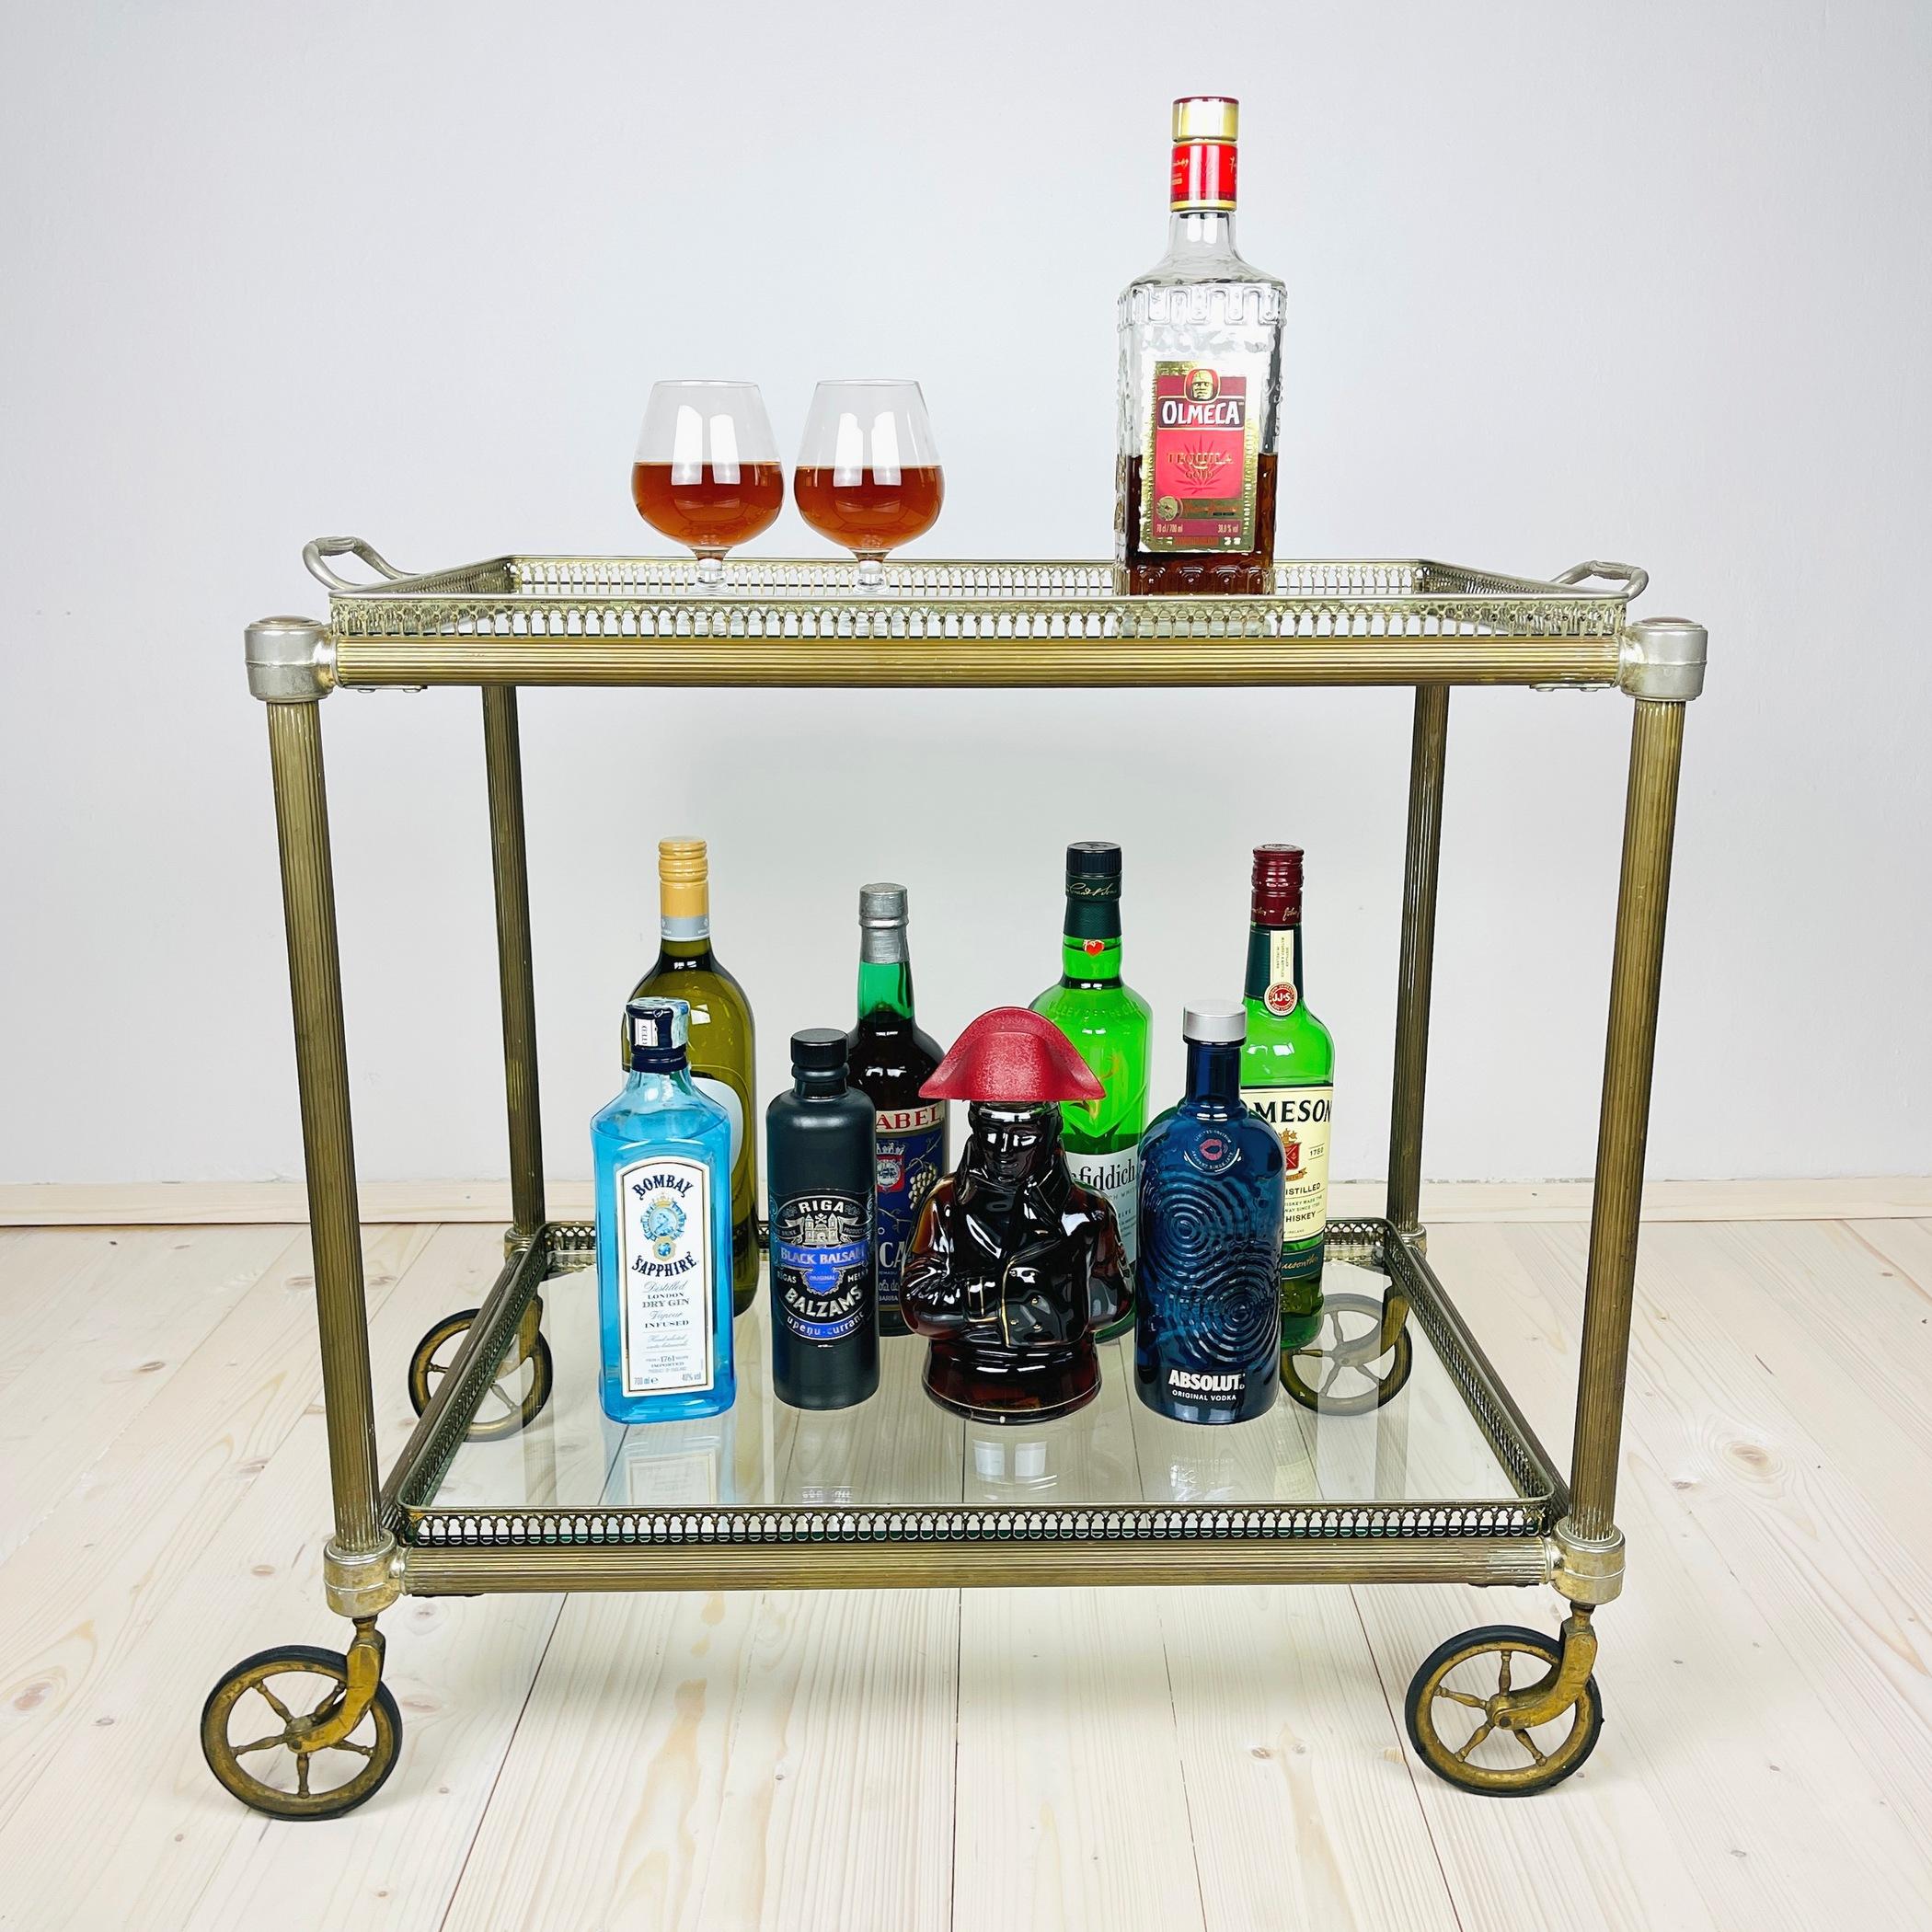 Vintage midcentury Italian trolley made in the 1950s of brass-plated metal, very sturdy, rolls great. This is a perfect vehicle to serve pre-dinner drinks at dinner parties. The wheels are moveable, making them both functional and beautiful! A table